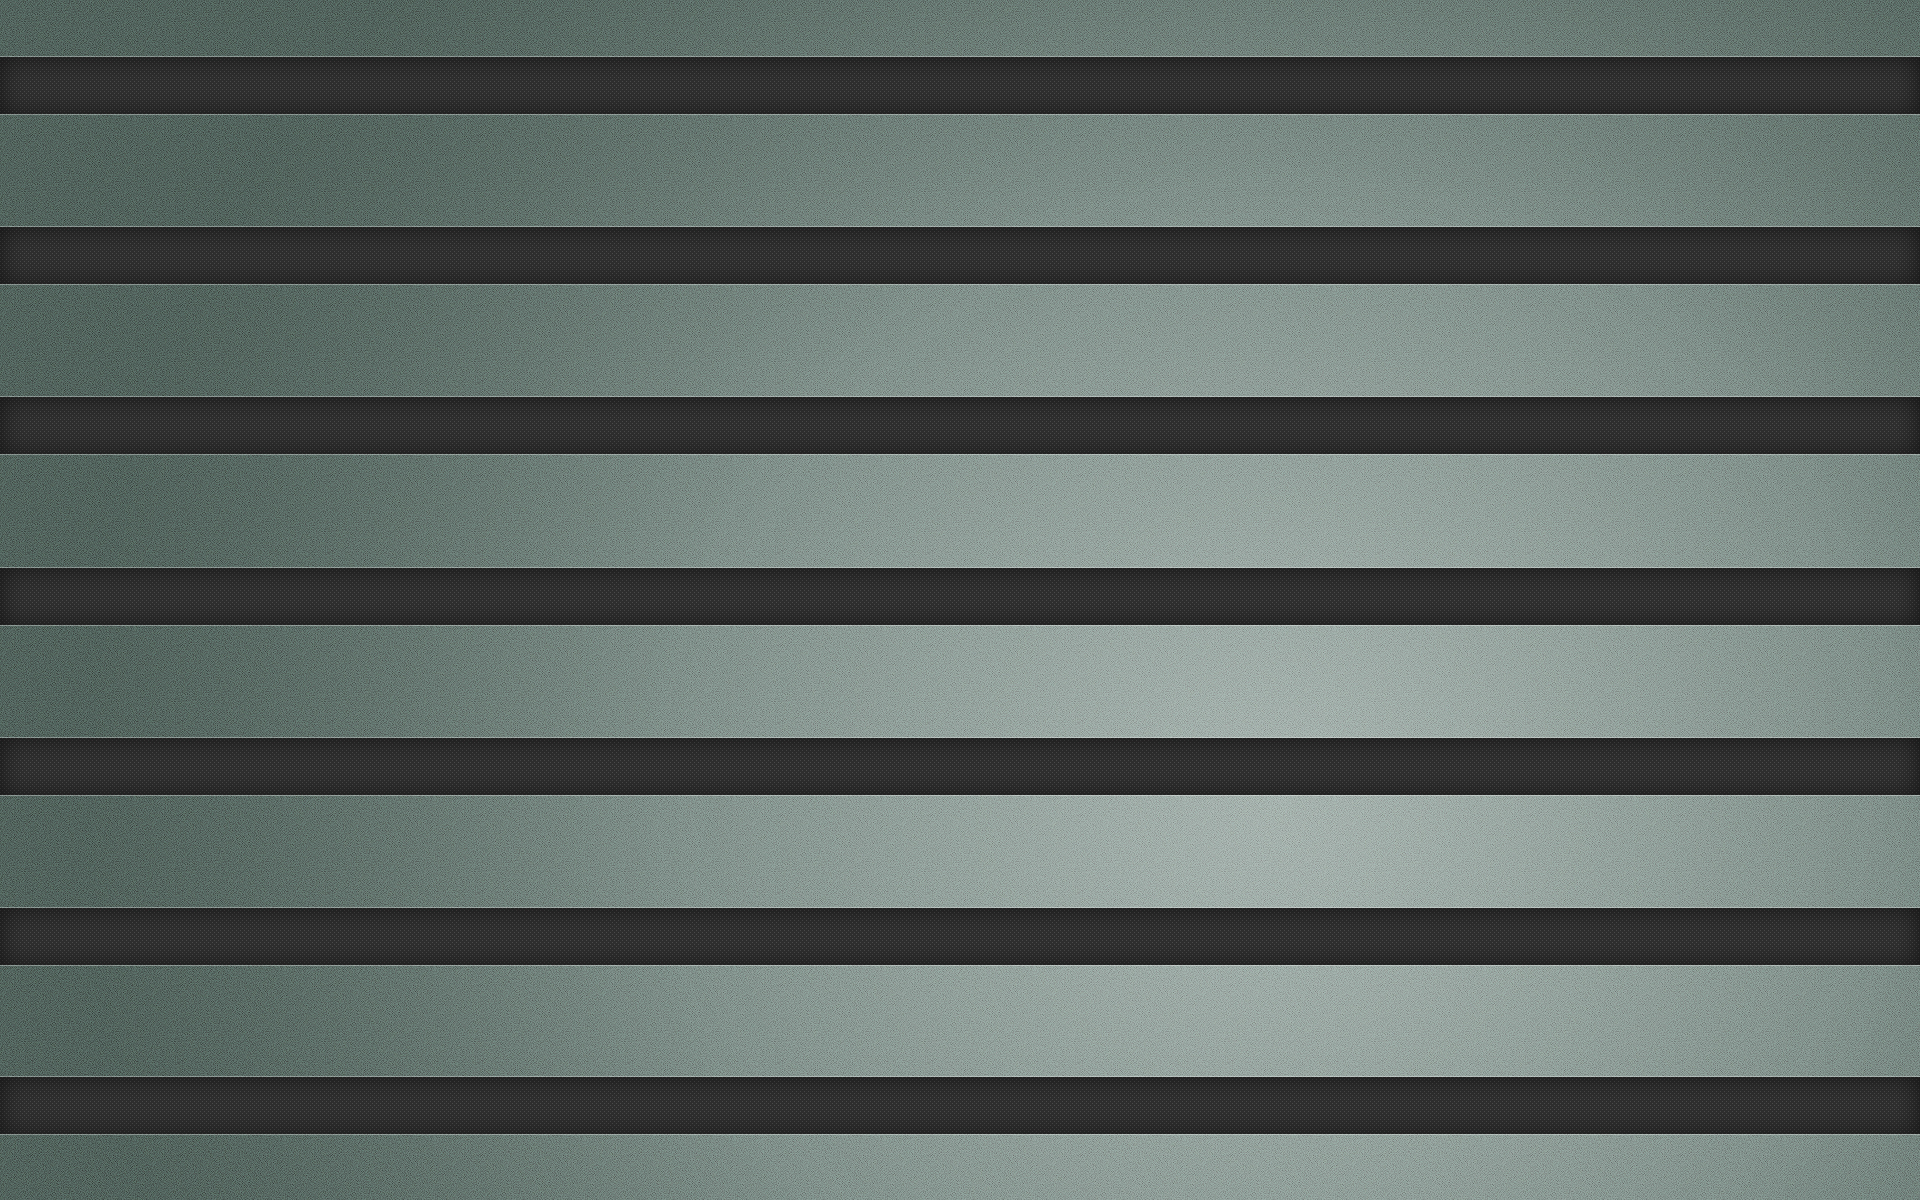 Horizontal Lines Texture Lines Texture Backgrounds Background For